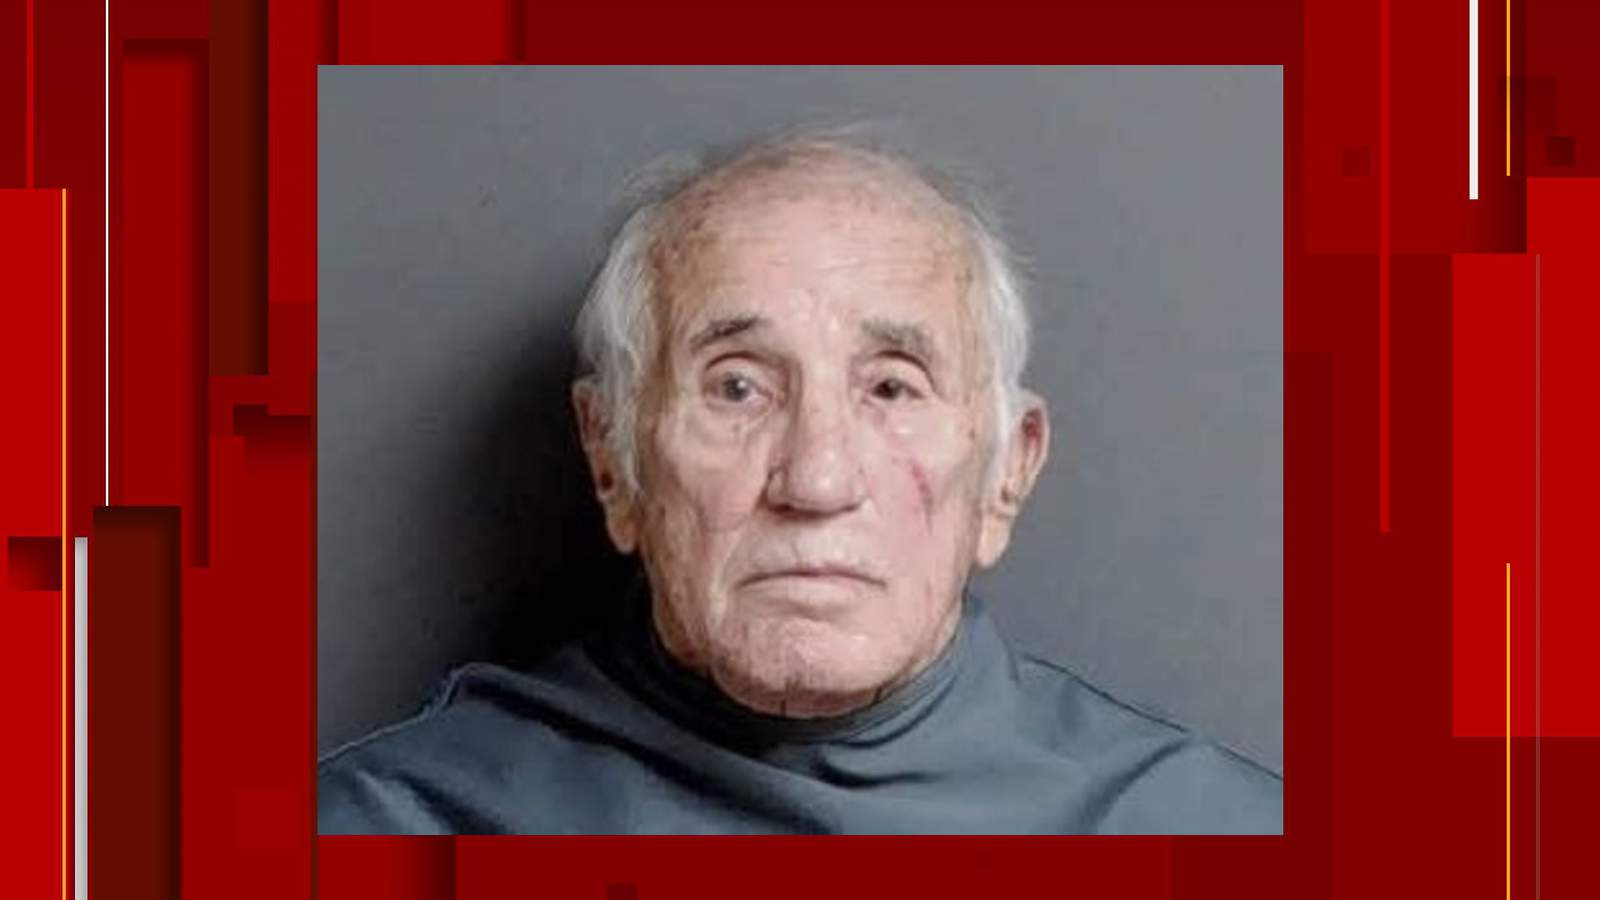 84-year-old man who admitted to killing his wife near Smith Mountain Lake died from COVID-19 complications